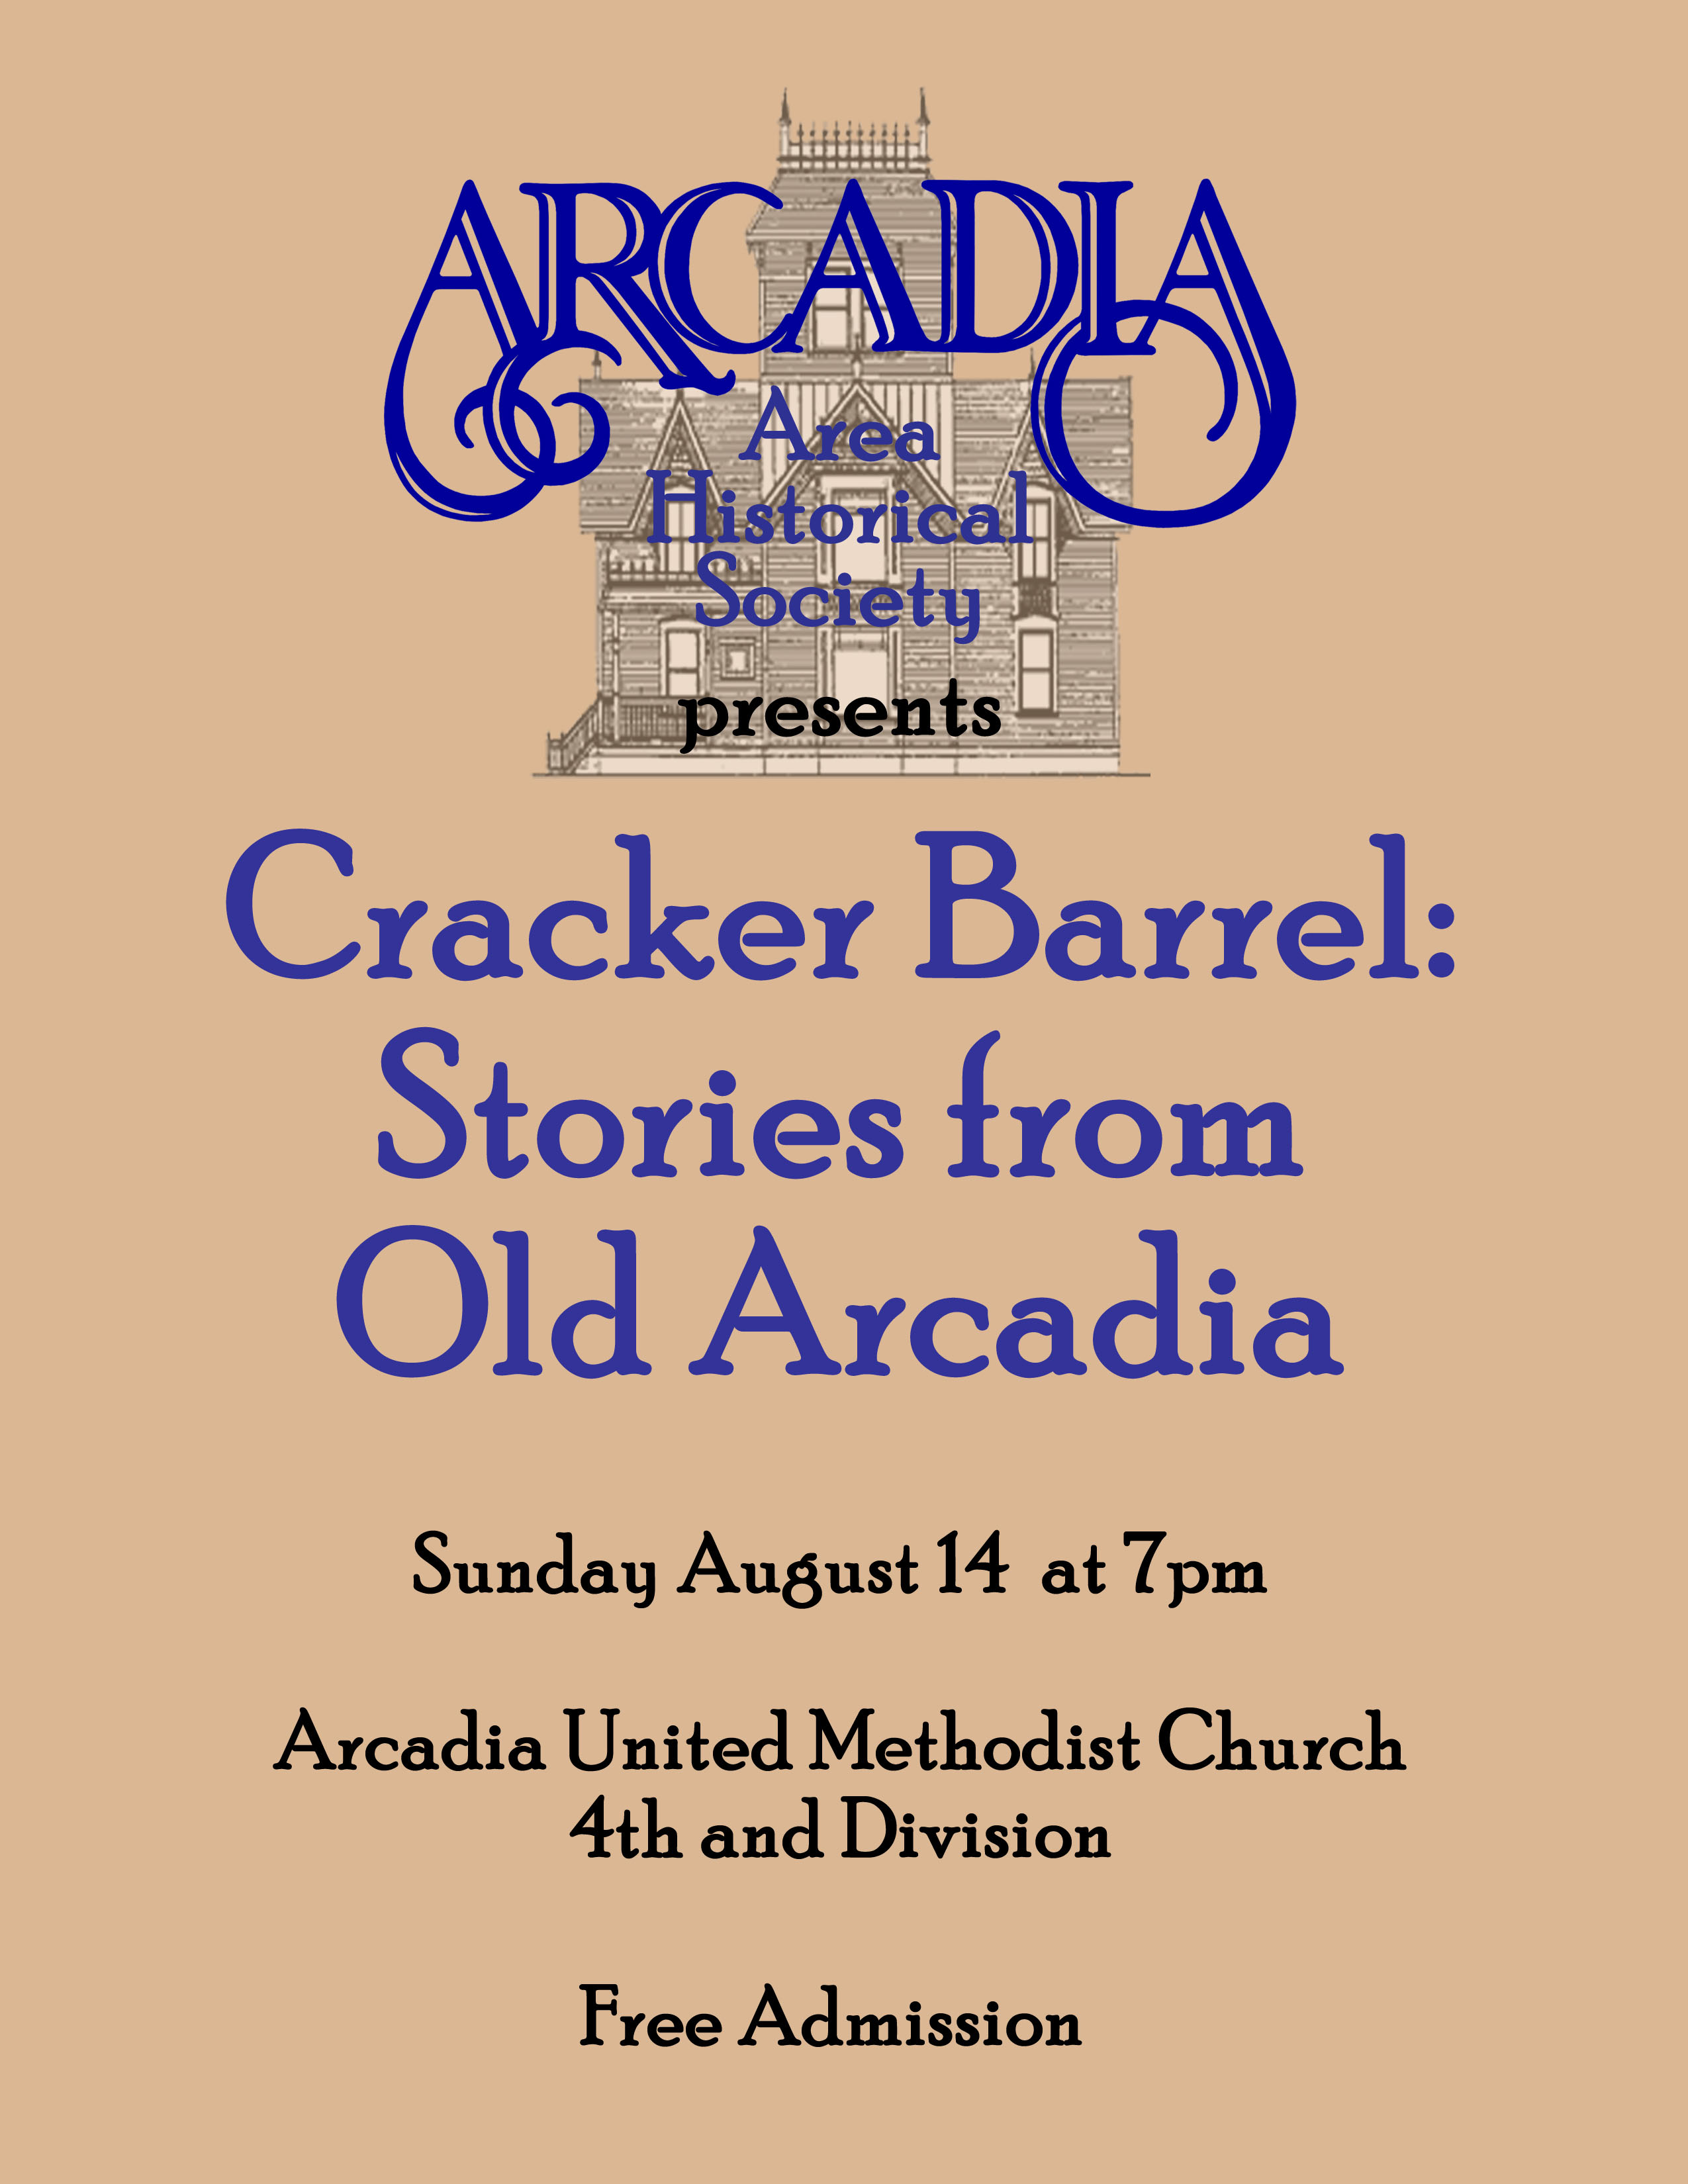 Cracker Barrel 2016: Stories from Old Arcadia